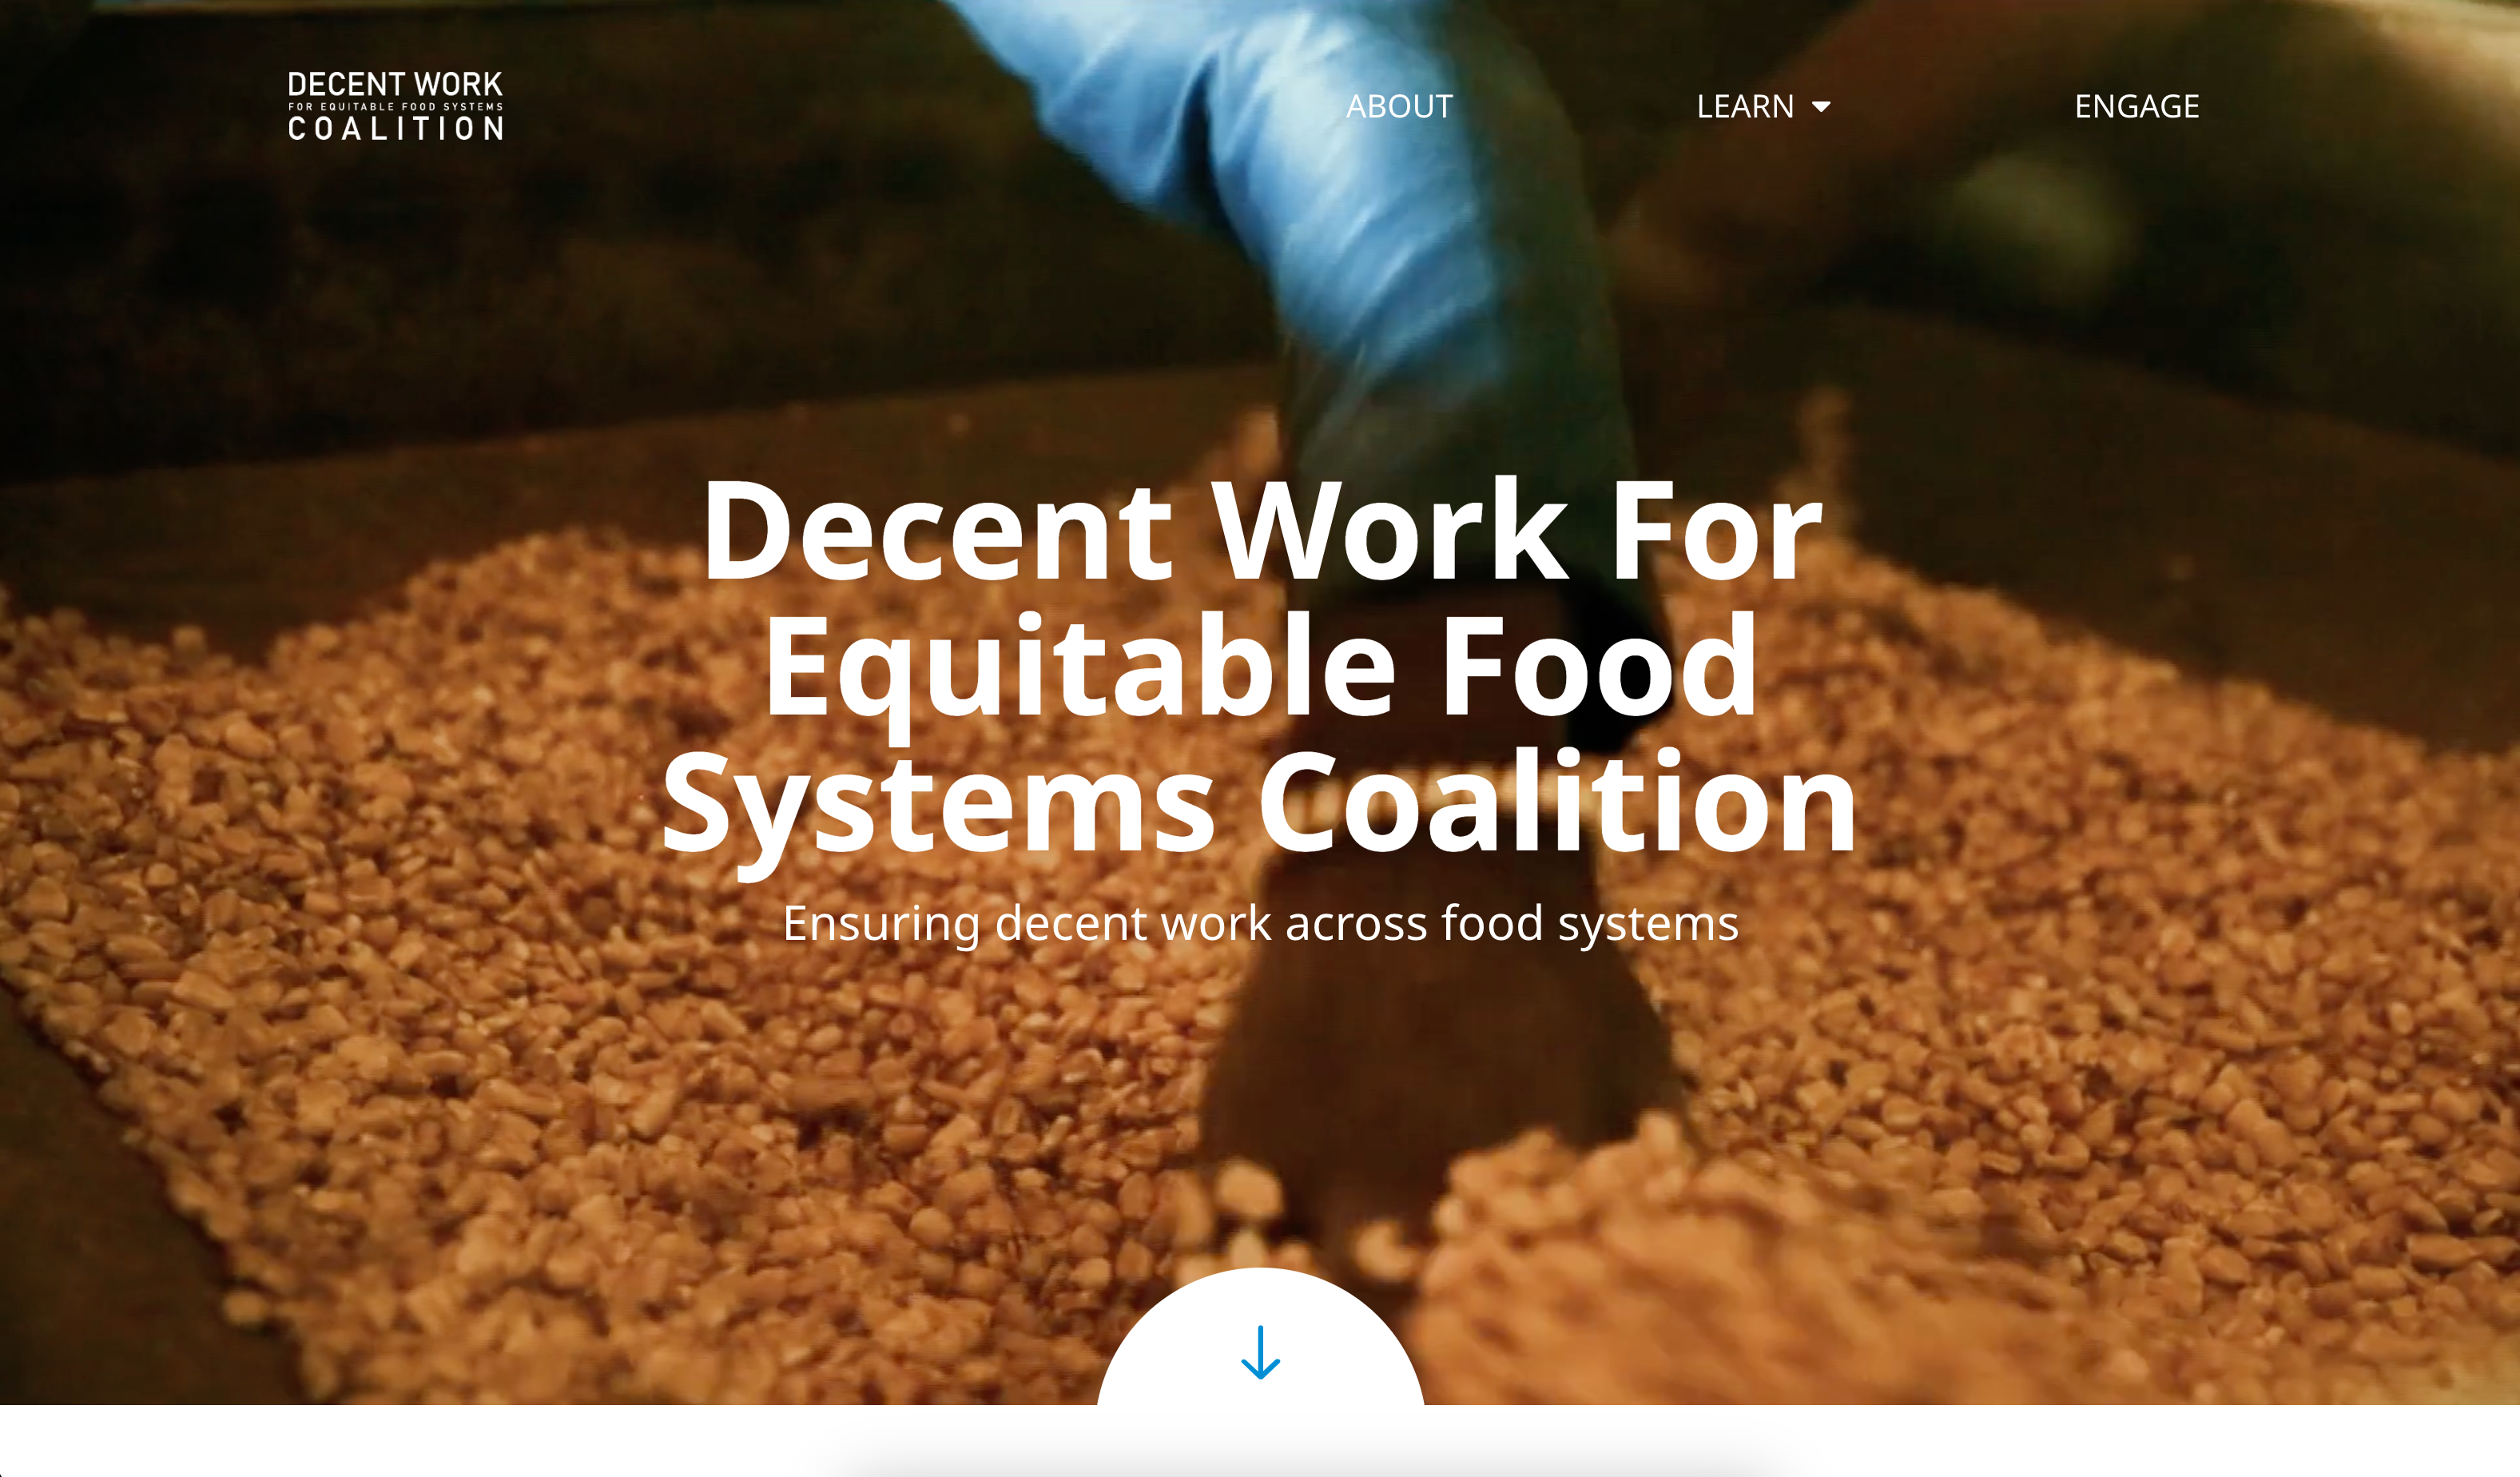 Decent Work for Equitable Food Systems Coalition